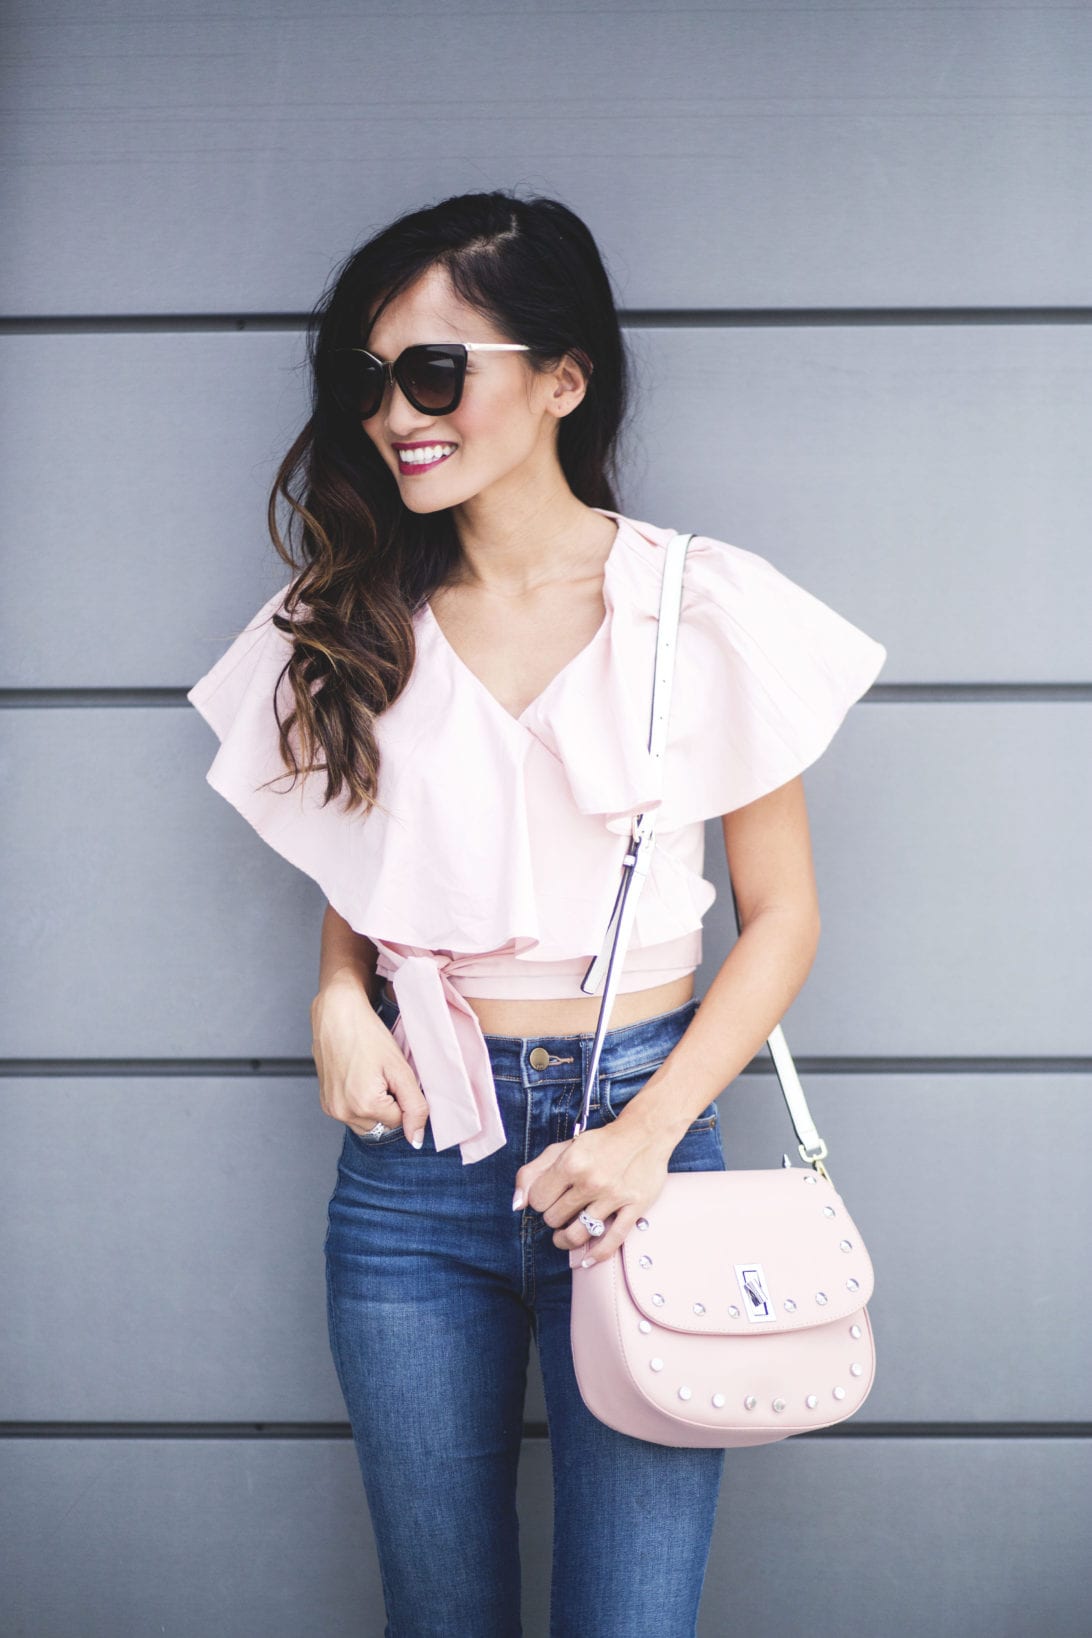 Prada sunglasses, pink frill top, chicwish, high waisted skinny jeans, wear pink, pink studded cross body bag, Susan G komen, race for the cure, breast cancer awareness 